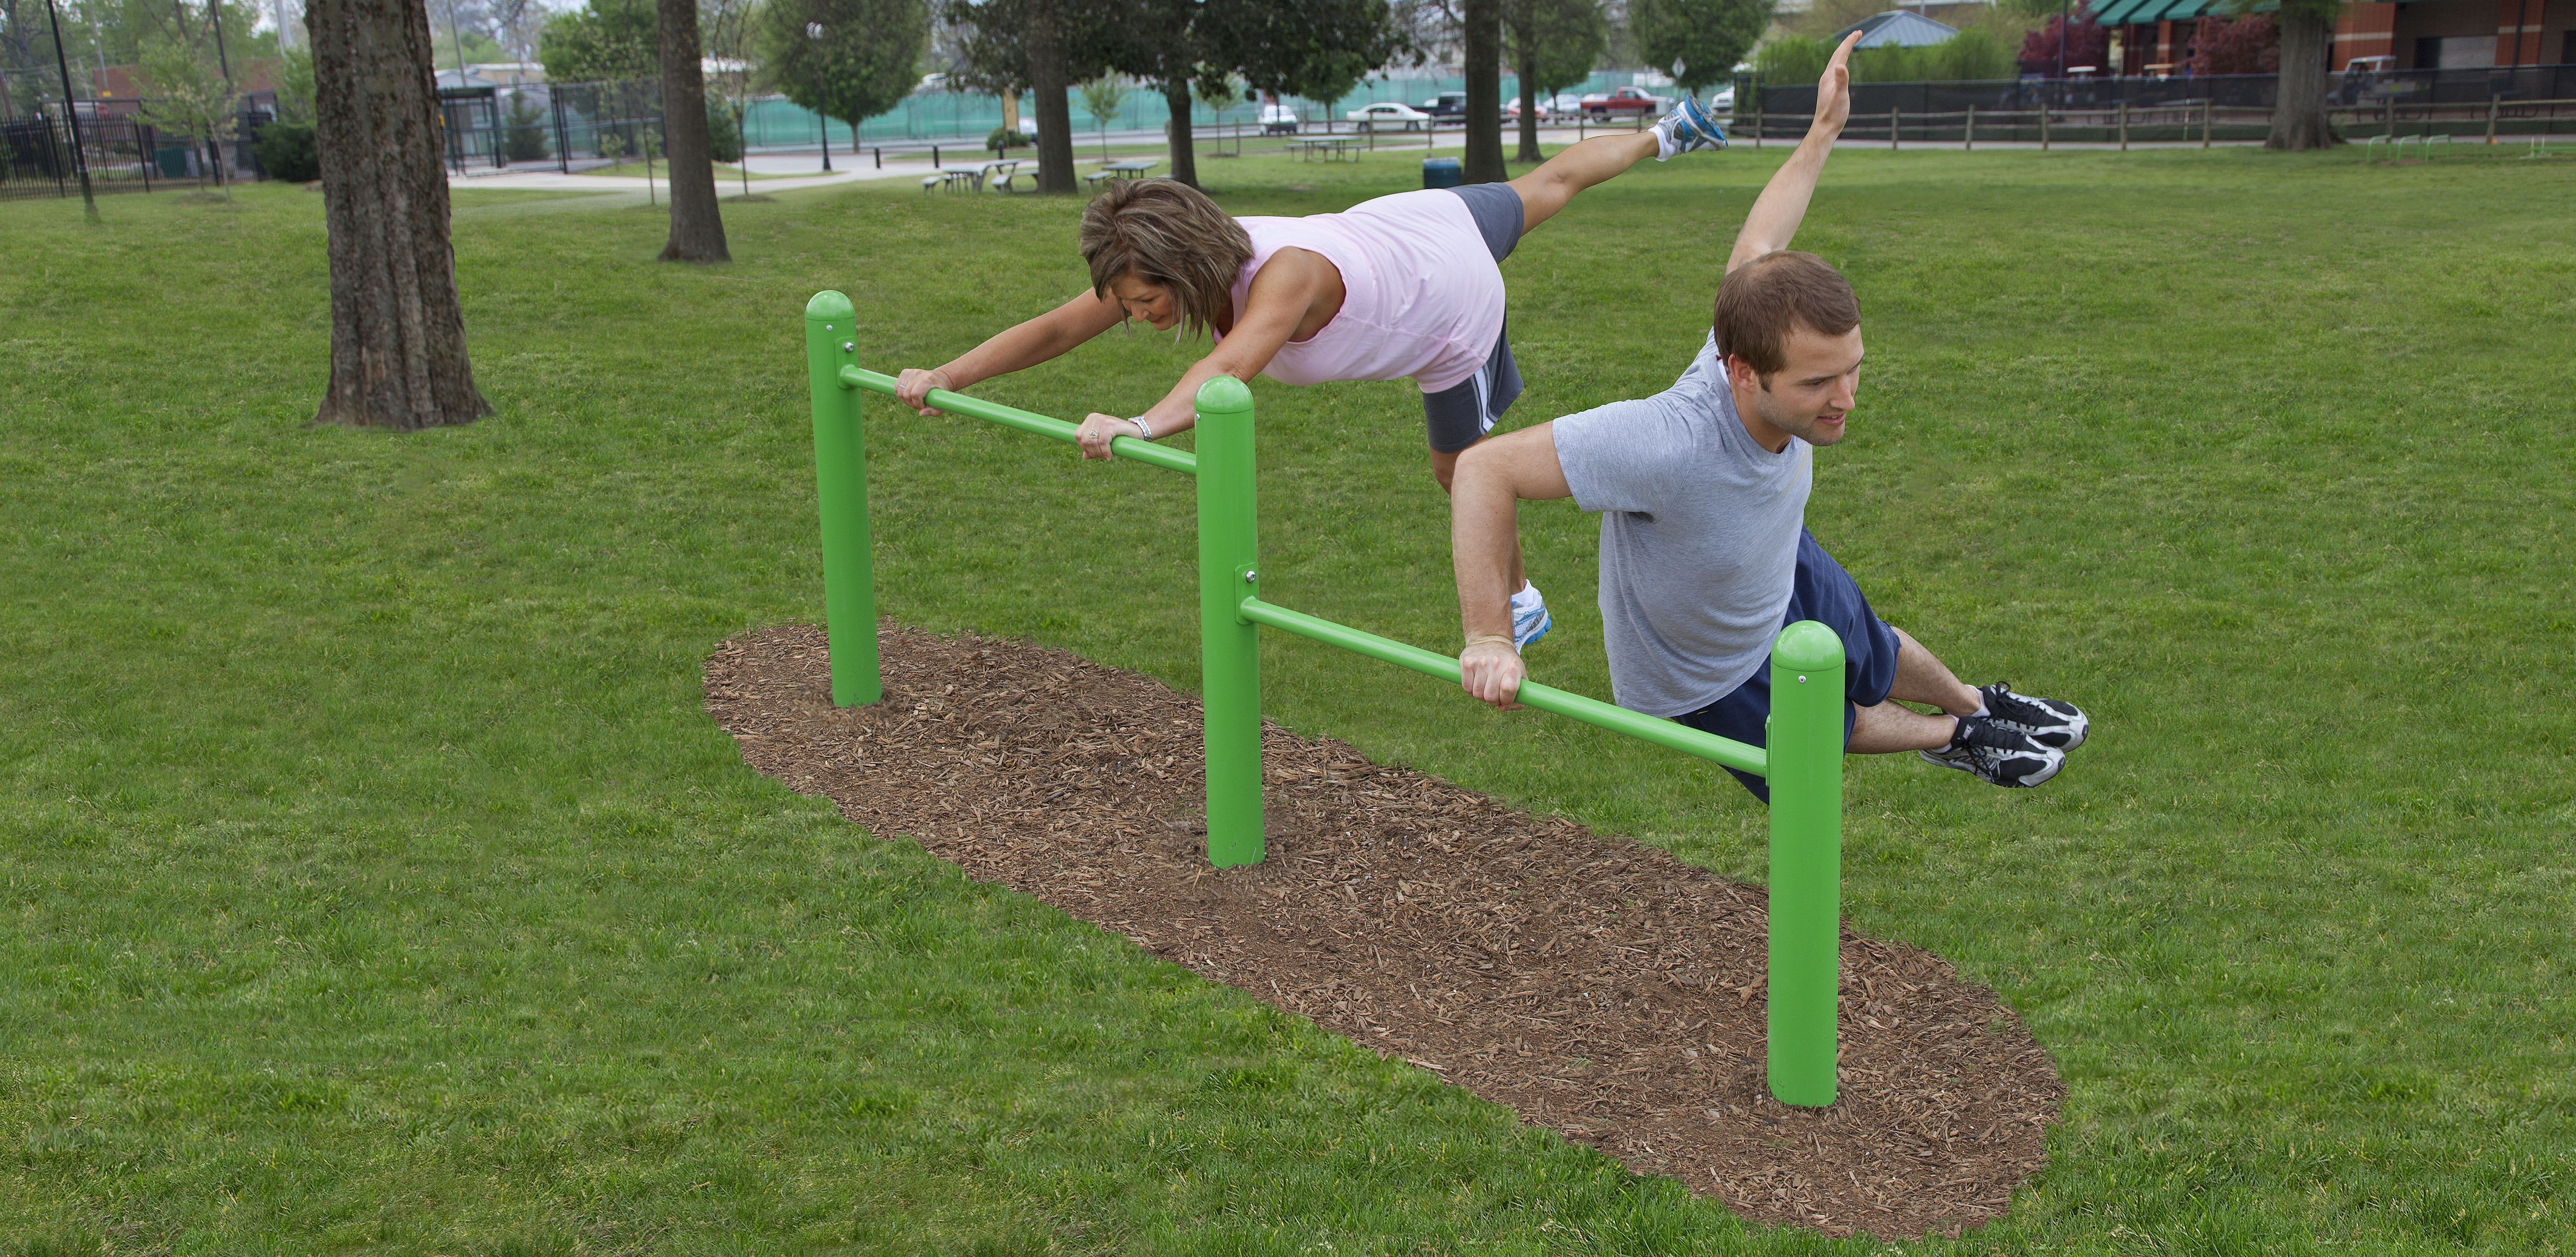 GameTime's iTrack Outdoor Fitness Featured in New York Times